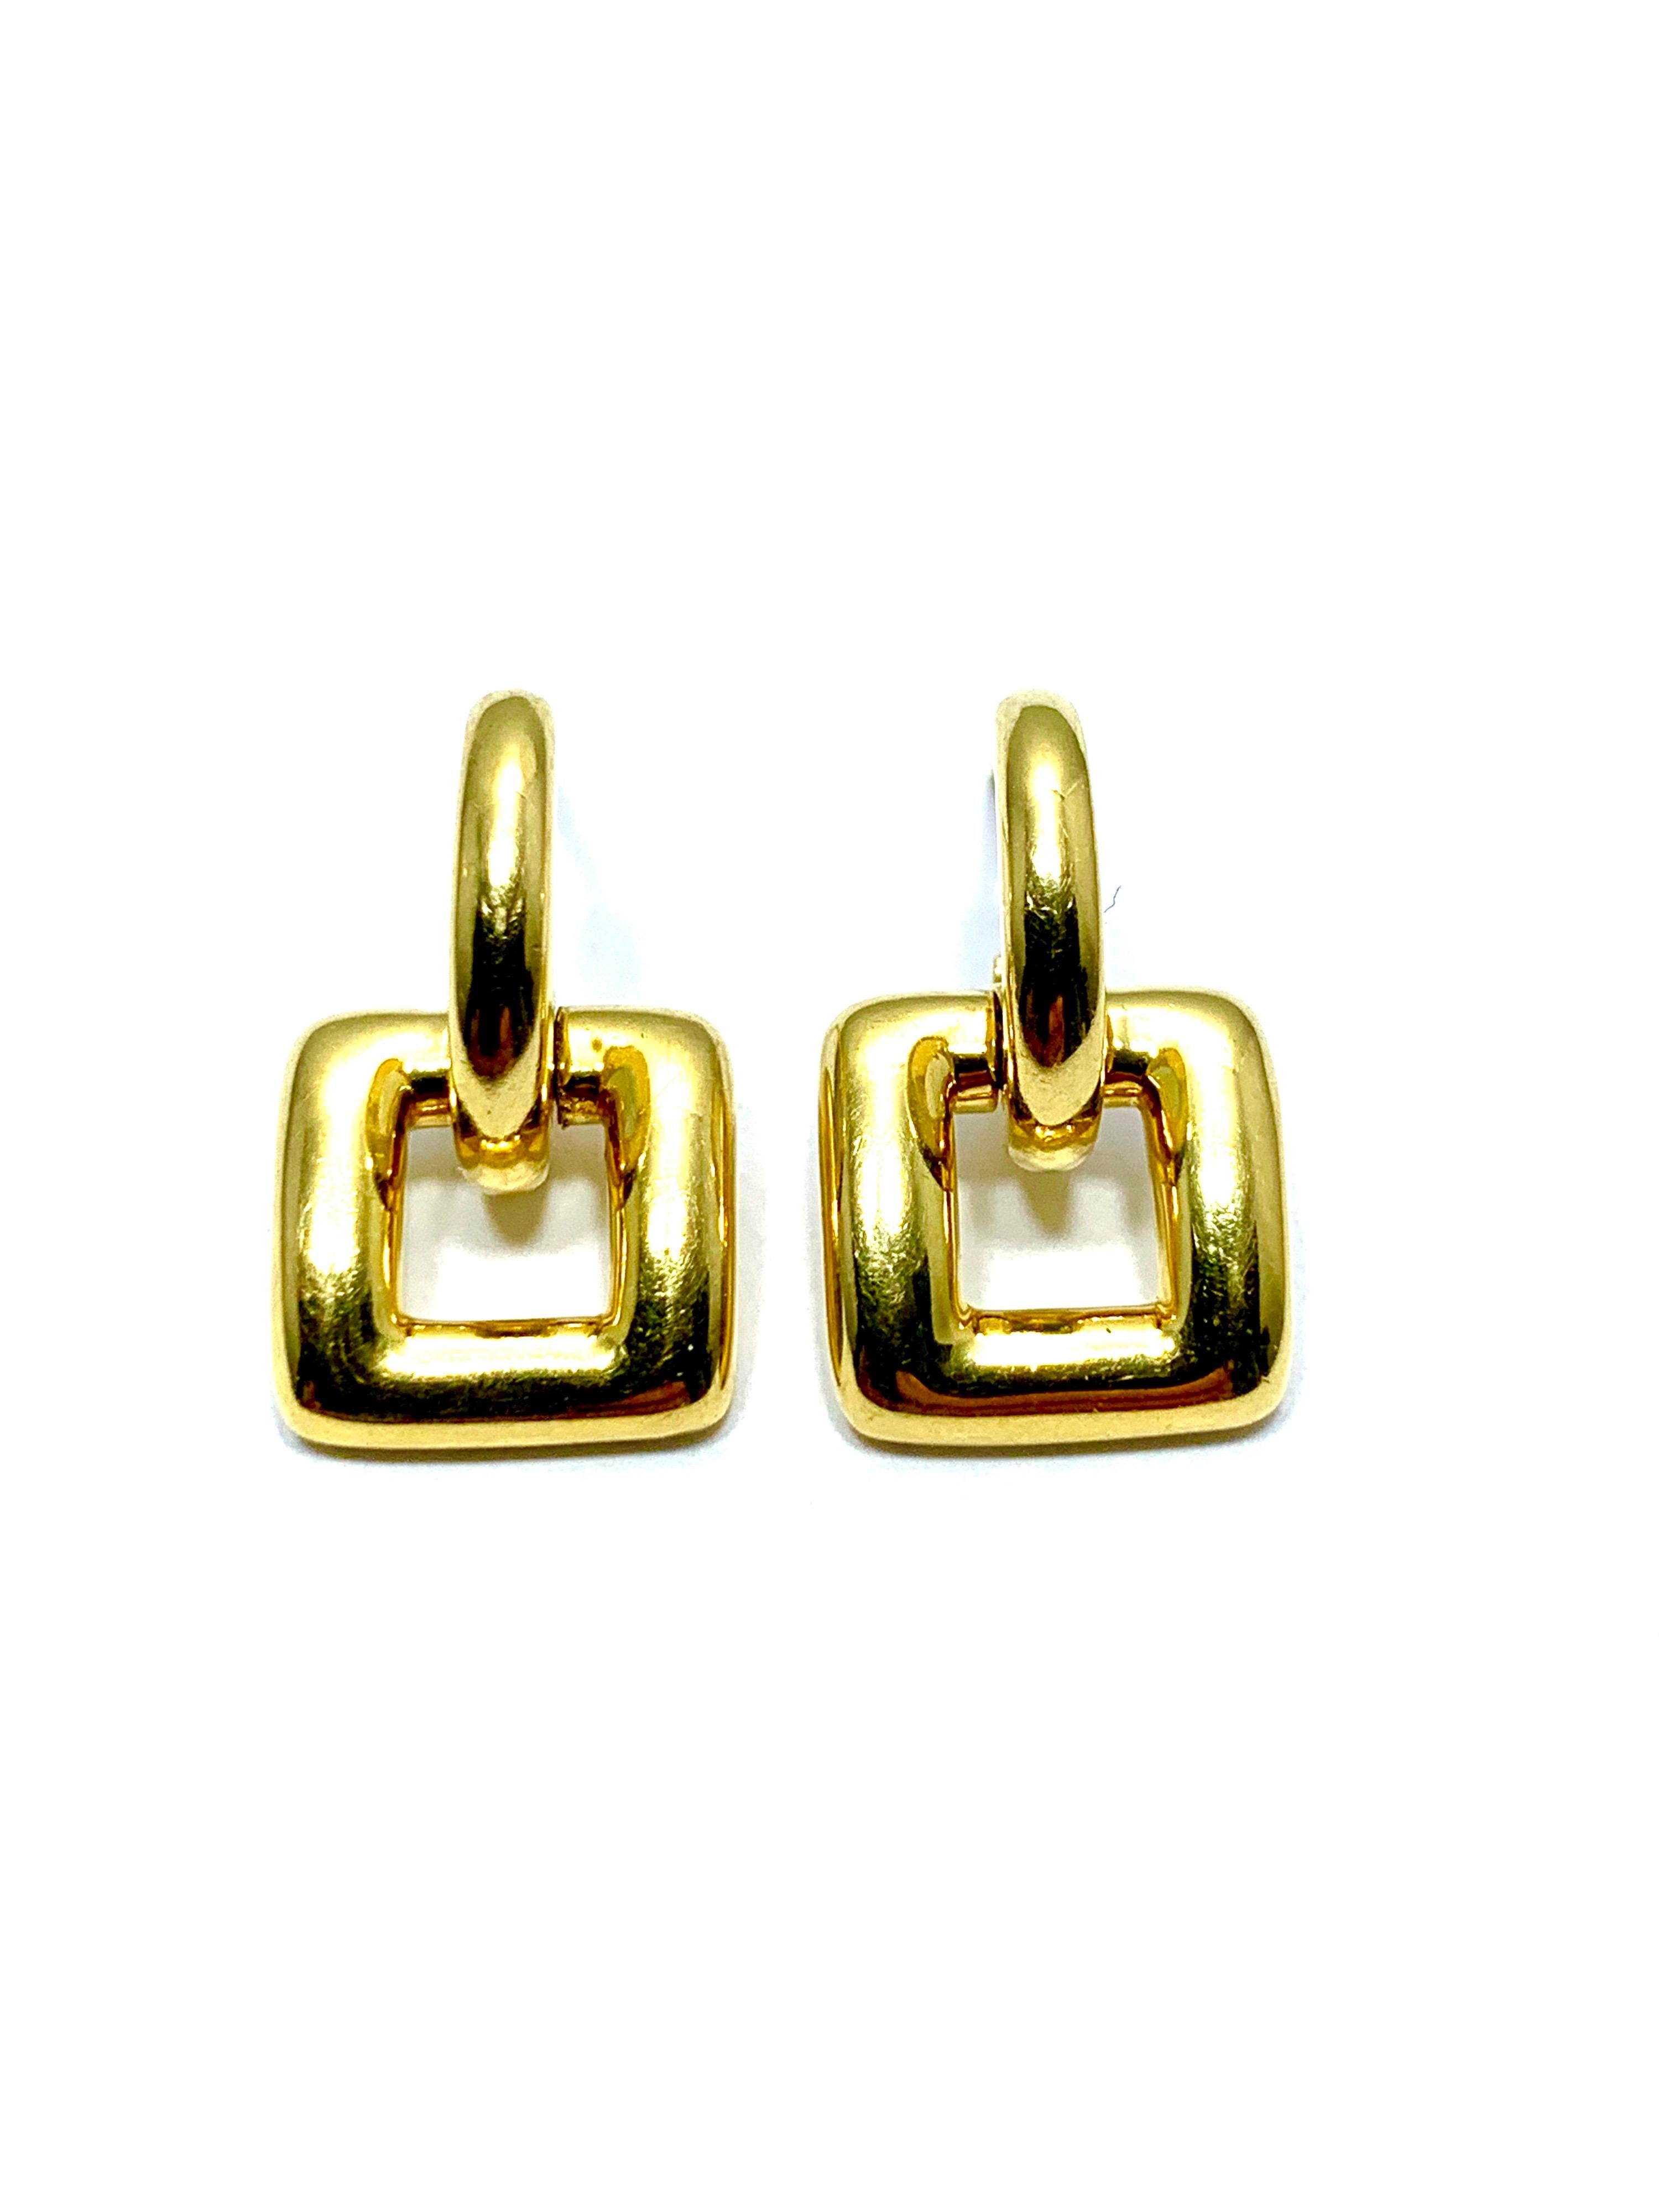 Simple and easy to wear, these Tiffany & Co. door knocker earrings will be a great addition to any wardrobe.  They are made in 18 karat yellow gold, and sit in the ear on a post.  The bottom portion of the earring is hinged to allow for movement. 